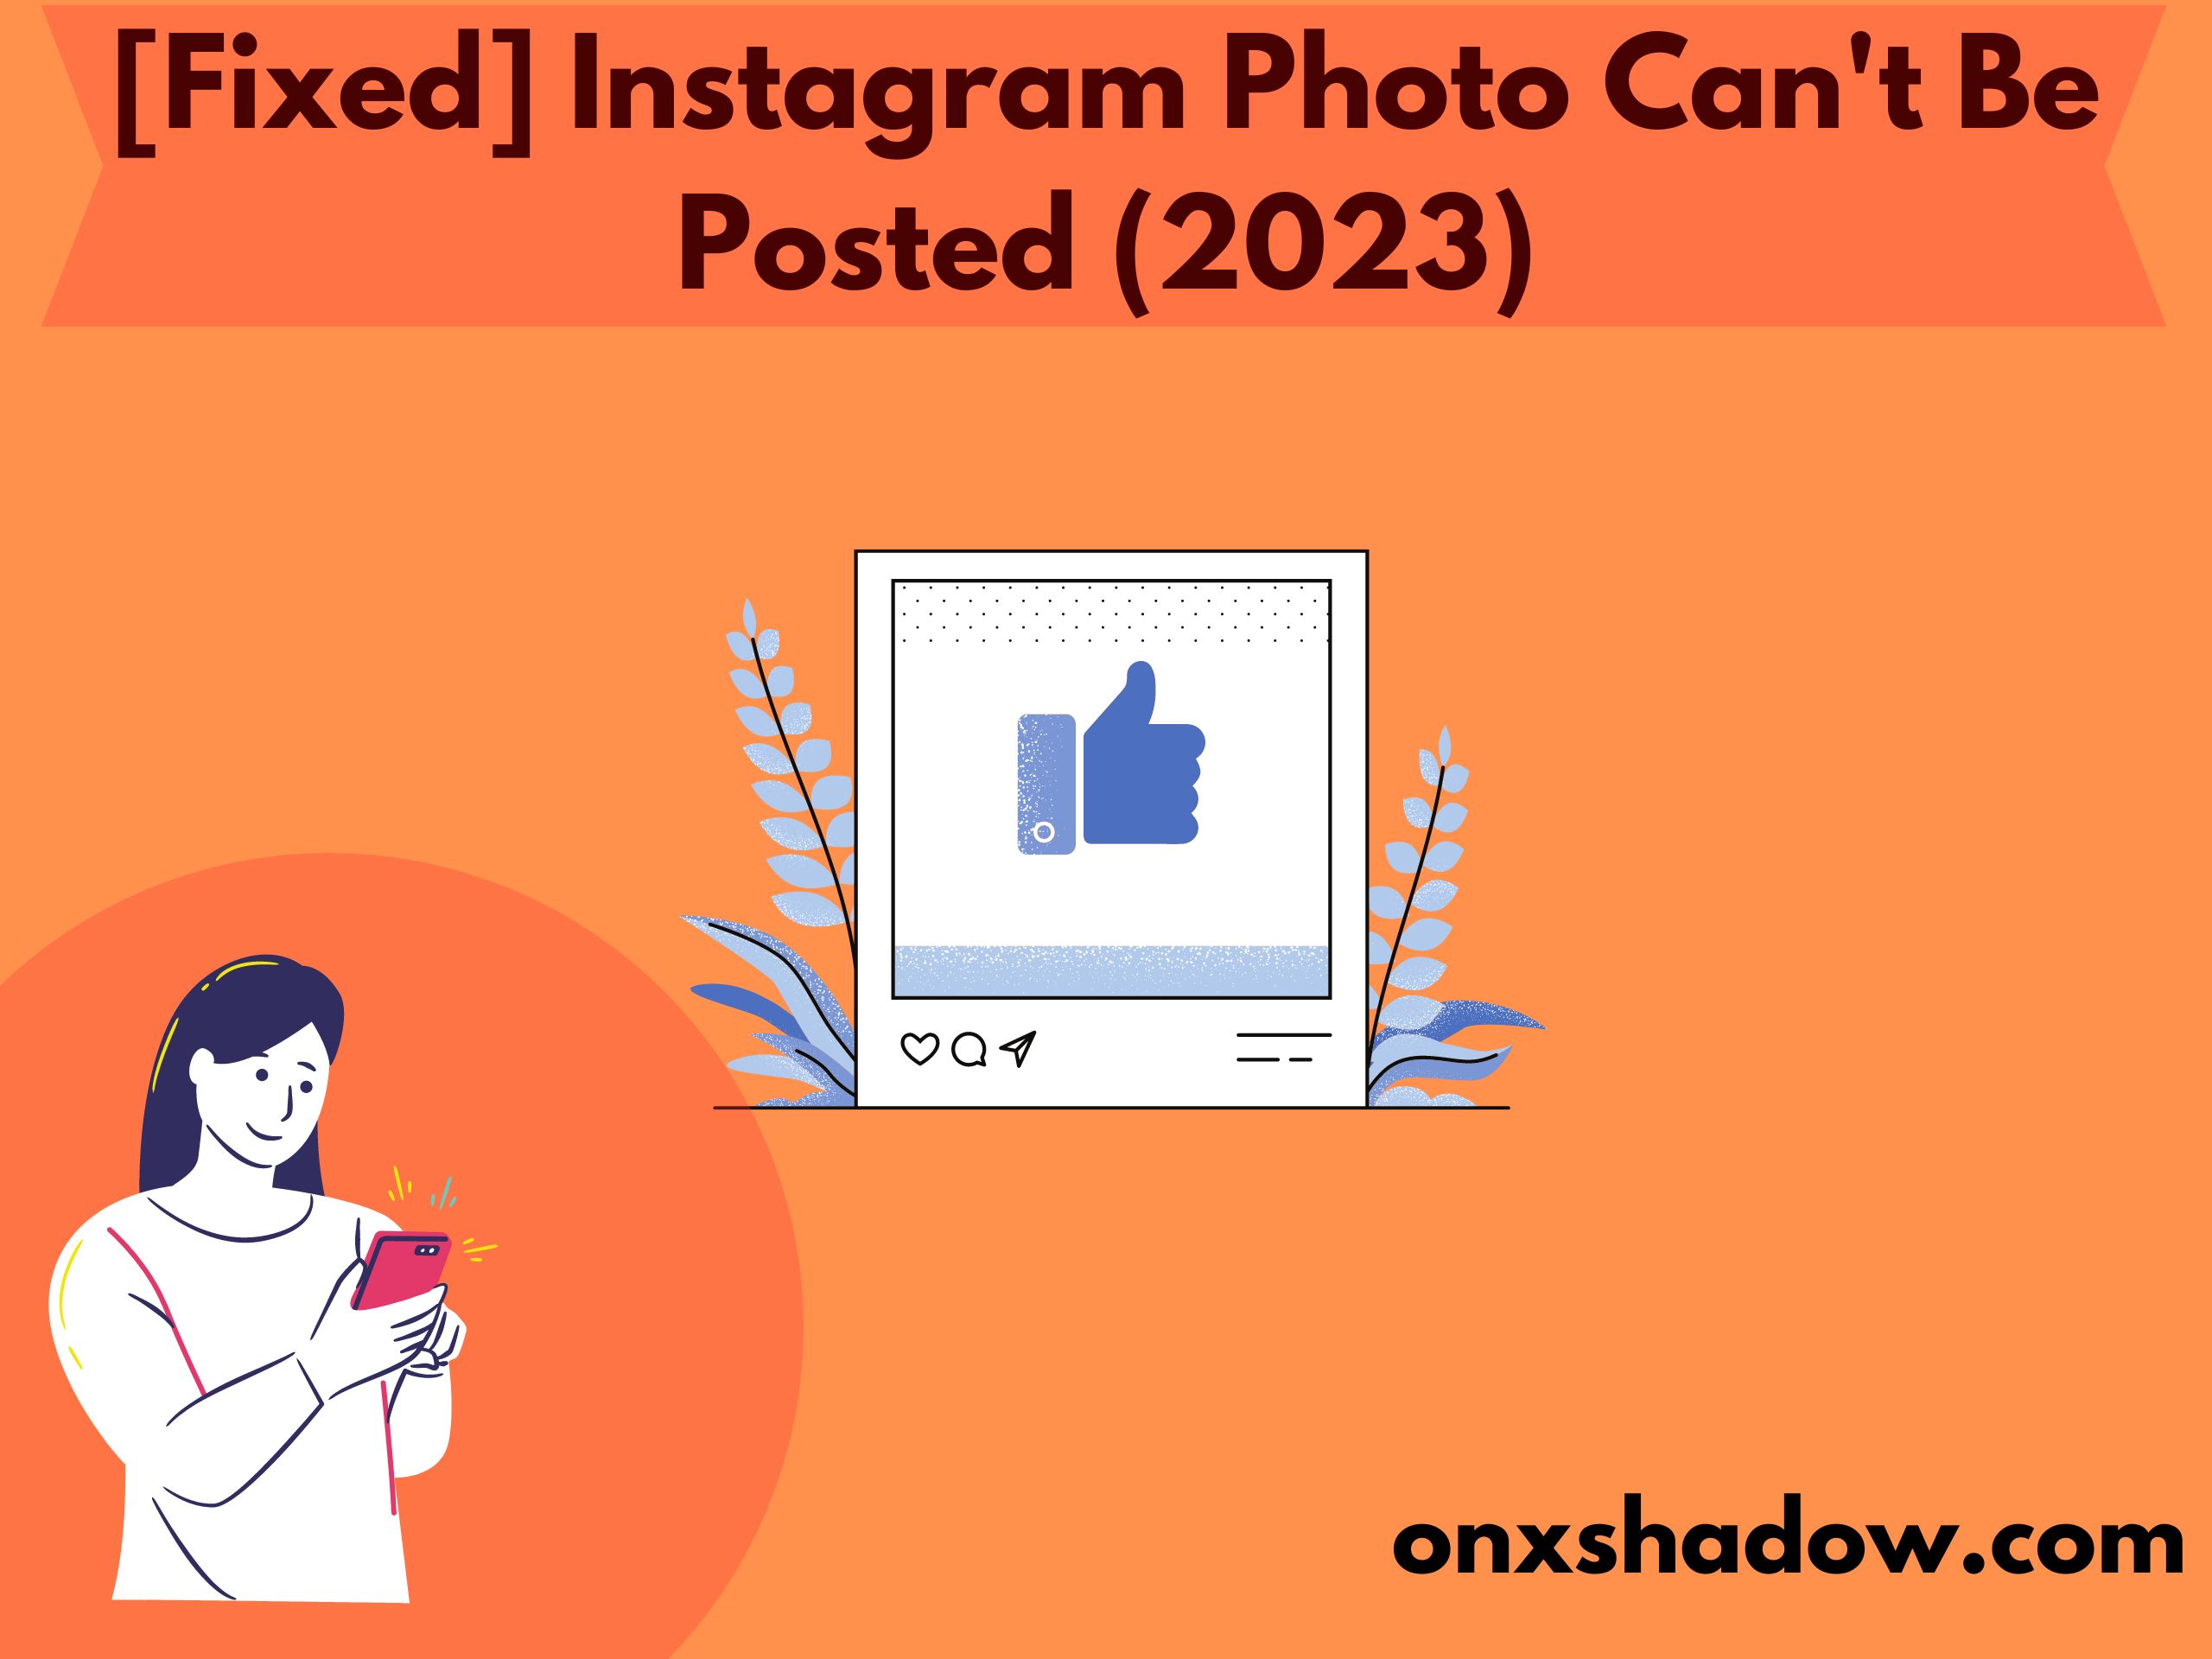 [Fixed] Instagram Photo Can't Be Posted (2023)